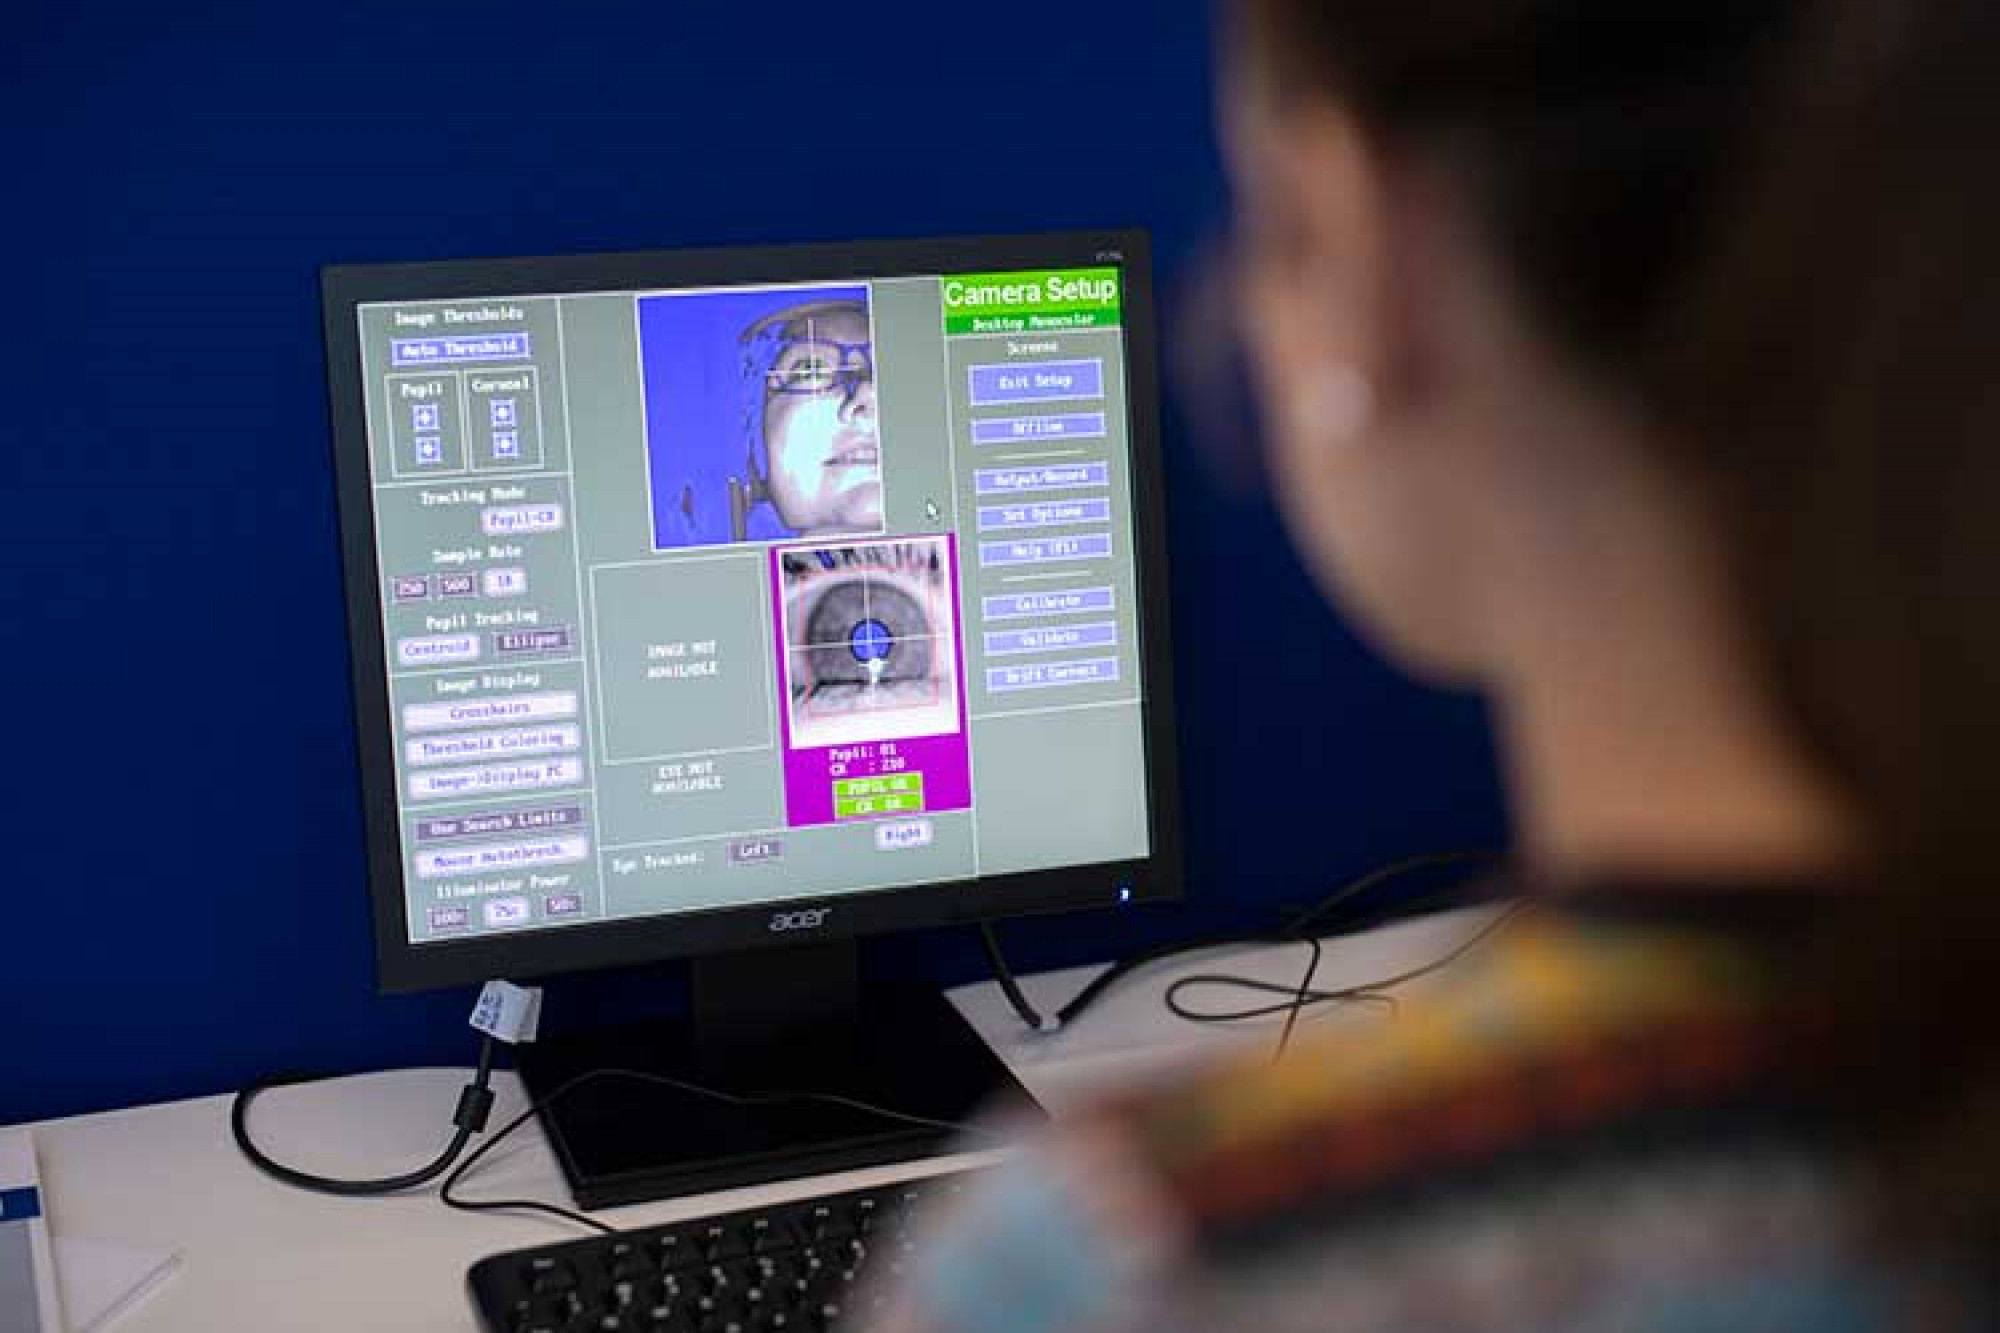 Close-up image of a computer screen with images of an eye and face to demonstrate the use of eye-tracking software